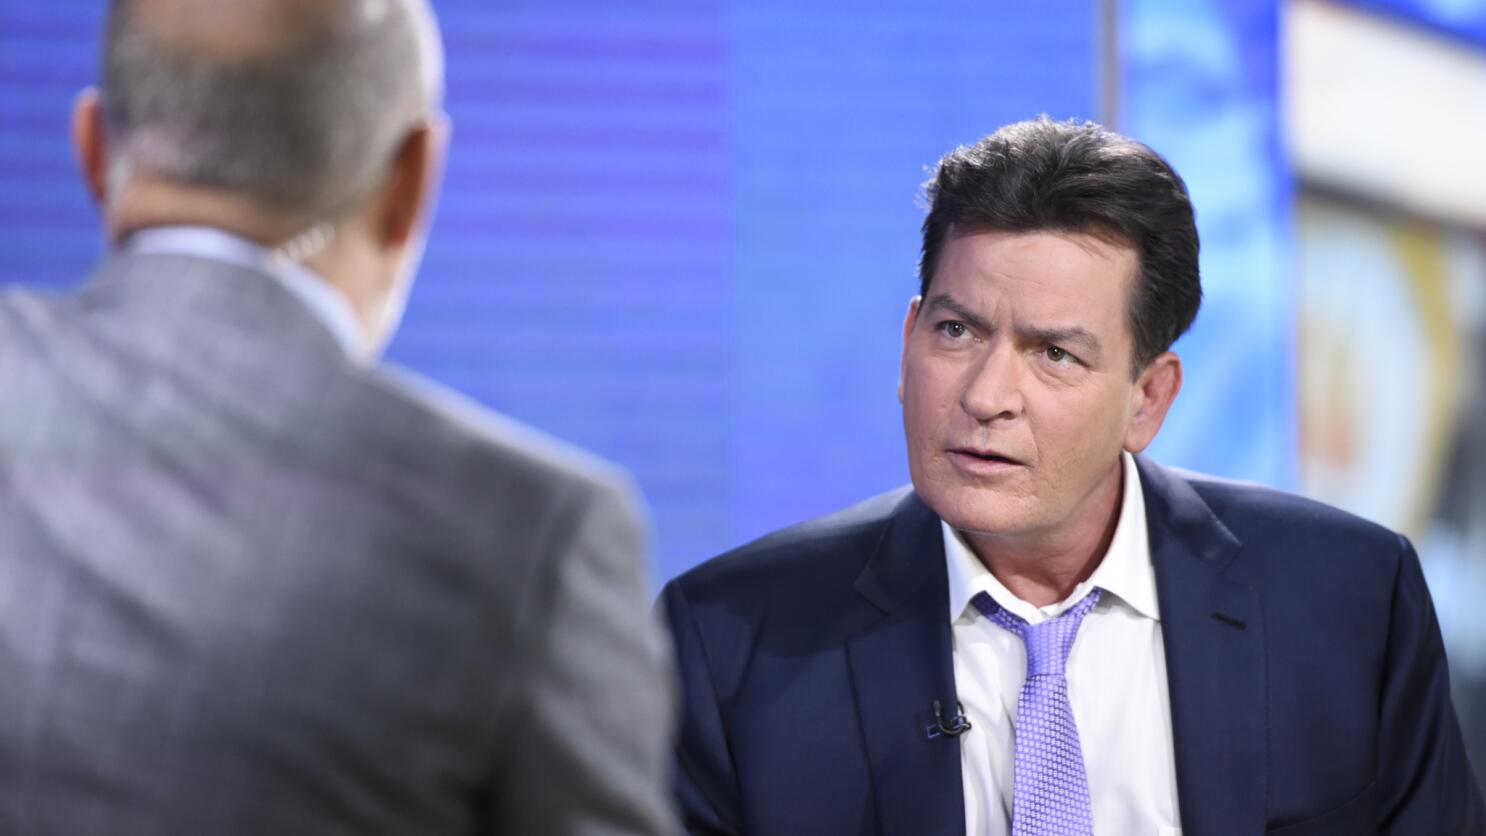 Charlie Sheen's Two and a Half Men regret: Actor speaks out